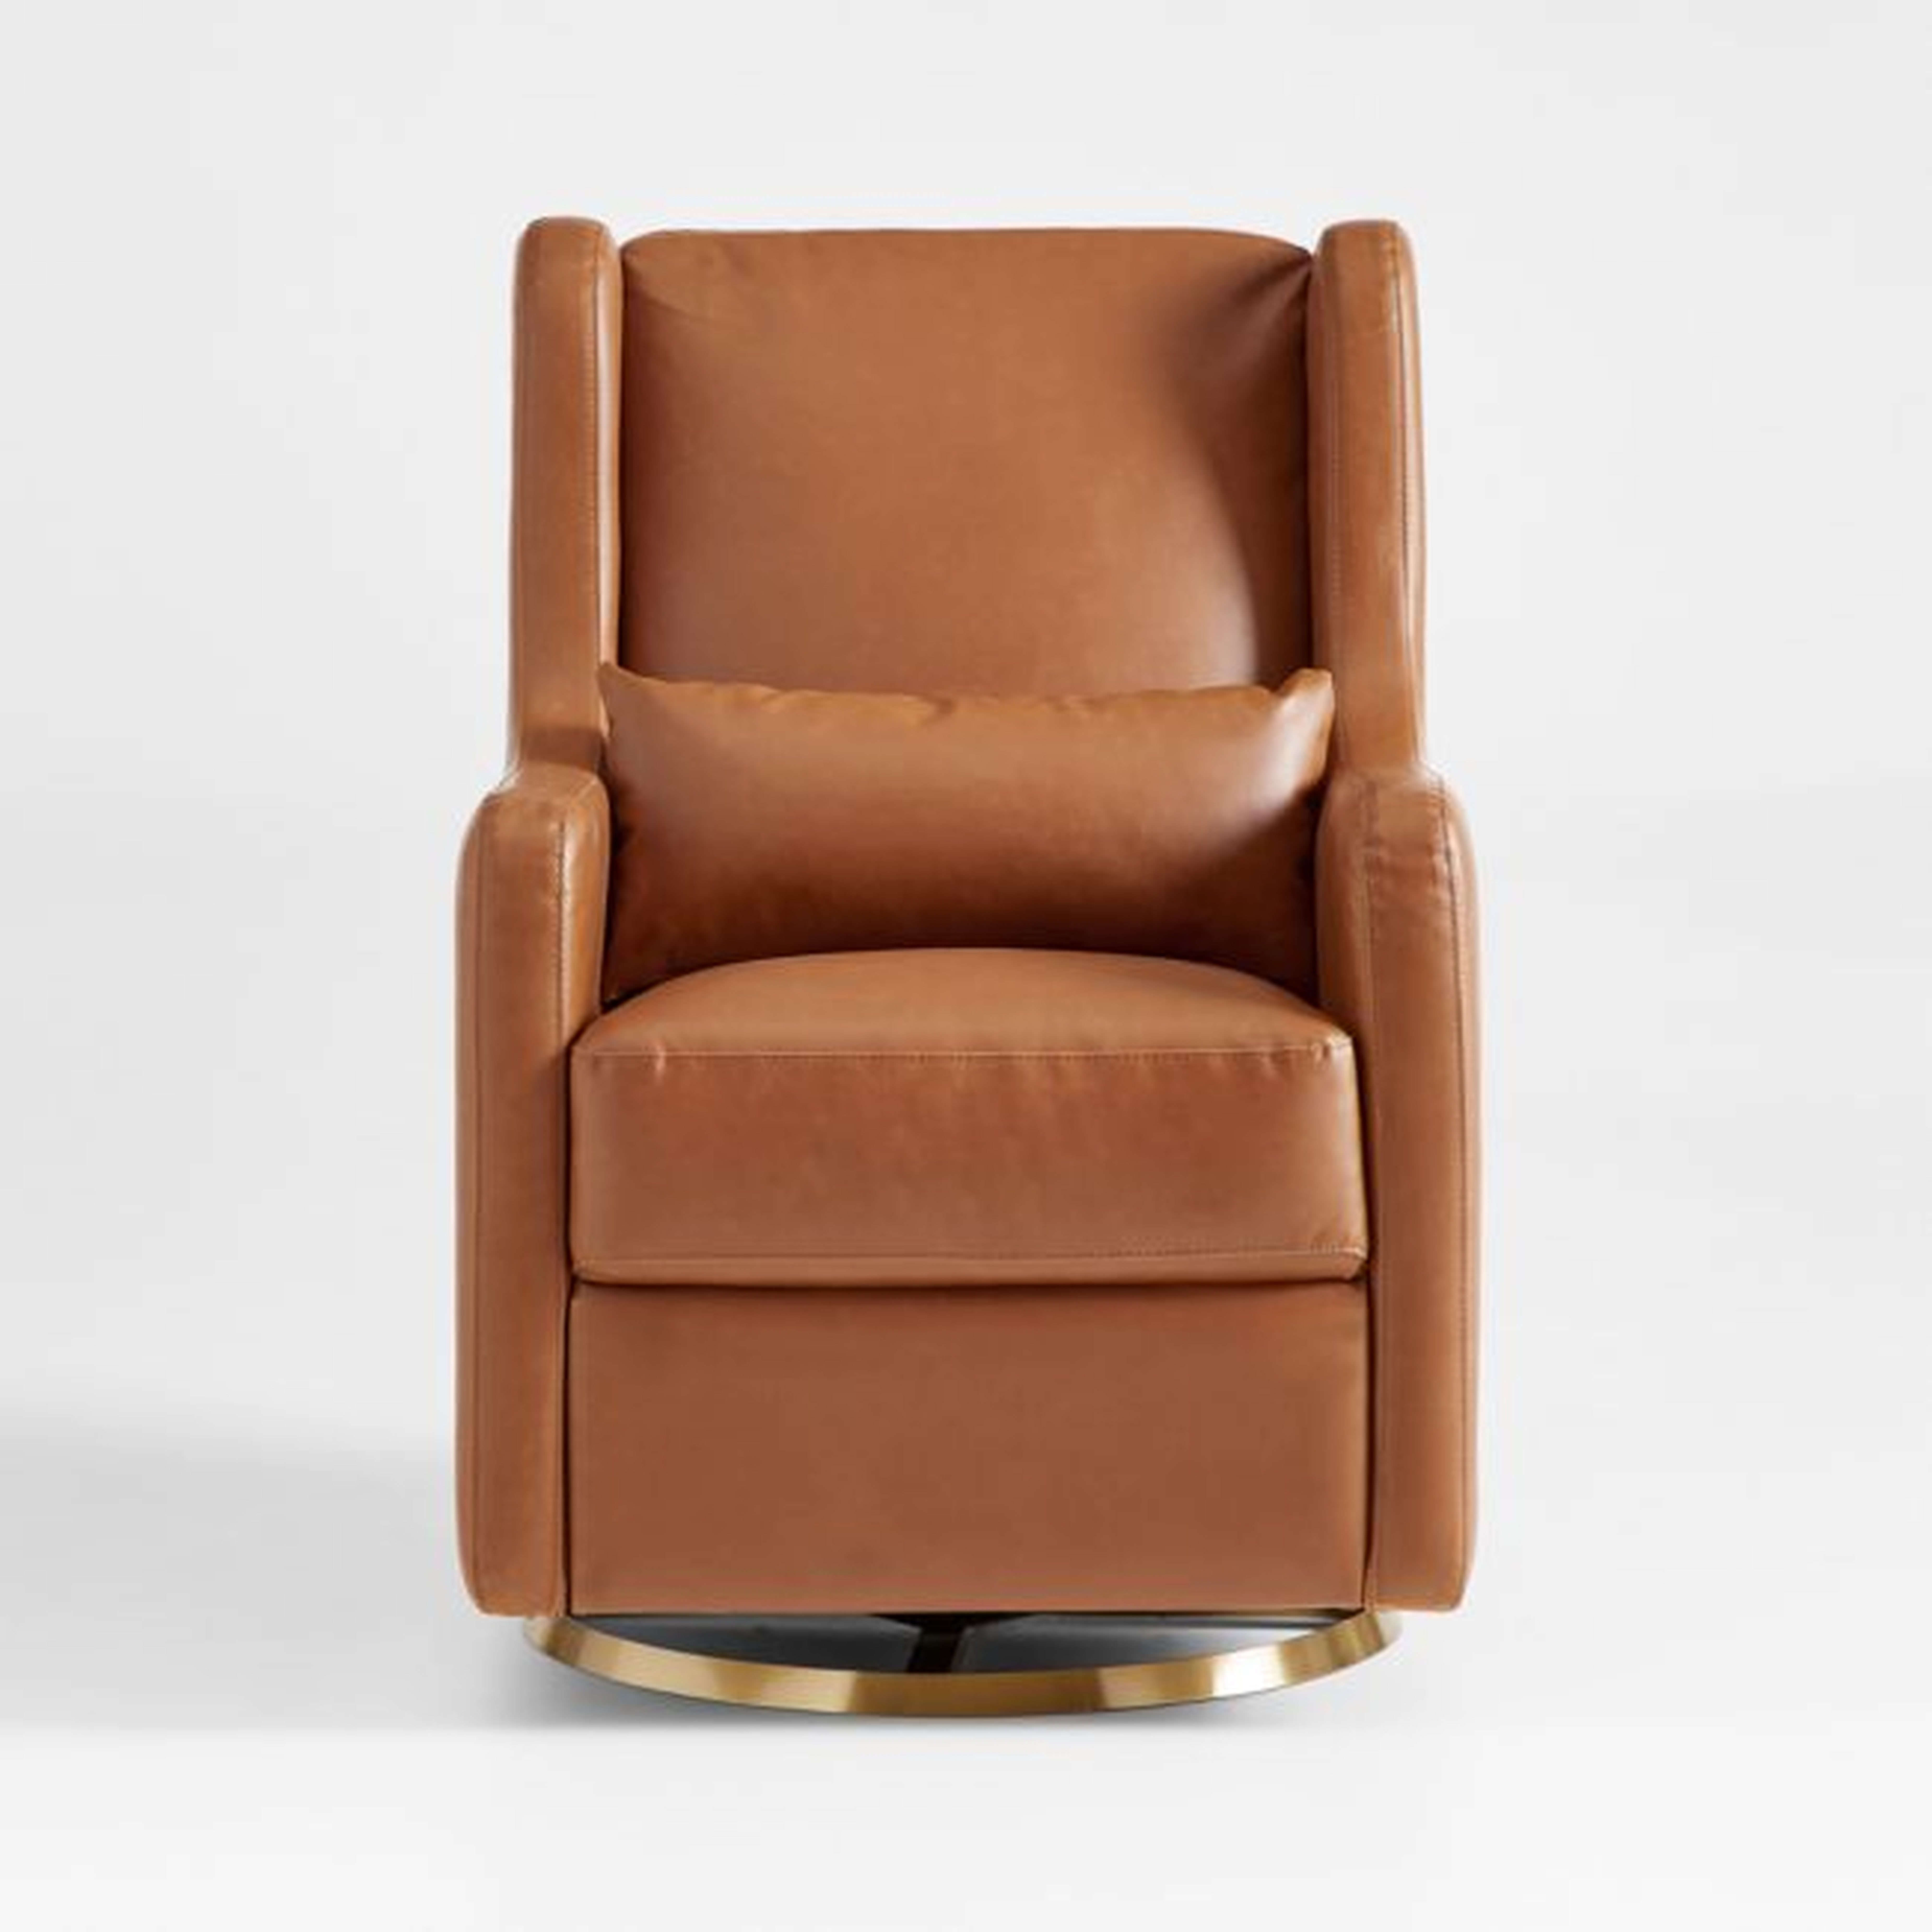 Wally Tan Vegan Leather Nursery Glider Chair - Crate and Barrel